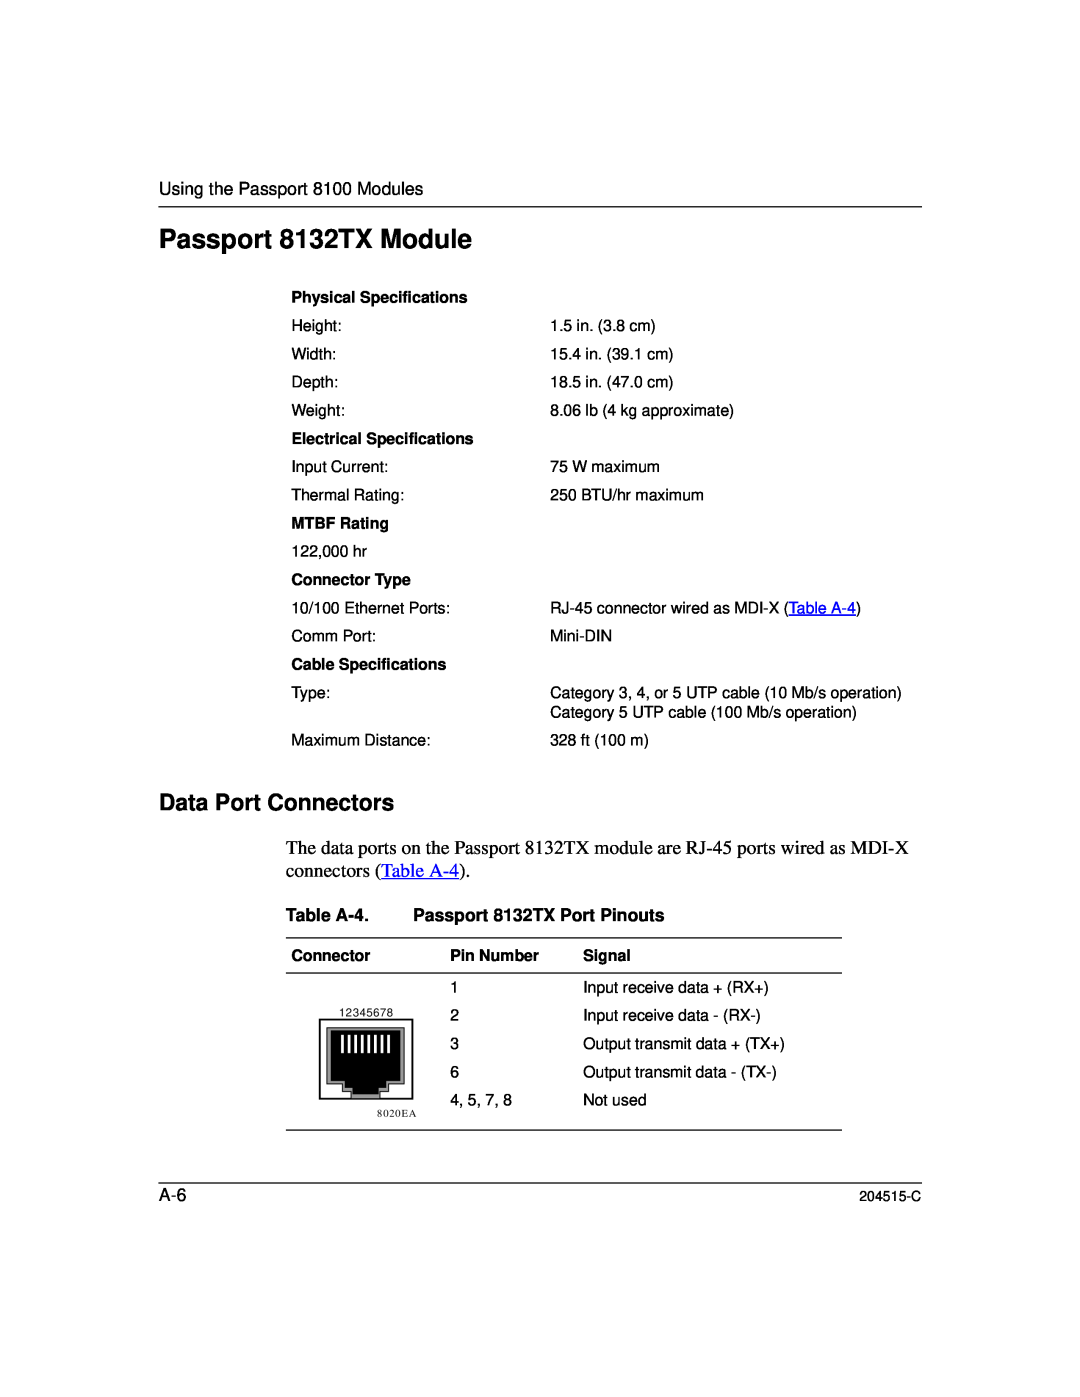 Nortel Networks Passport 8132TX Module, Data Port Connectors, Using the Passport 8100 Modules, Physical Specifications 